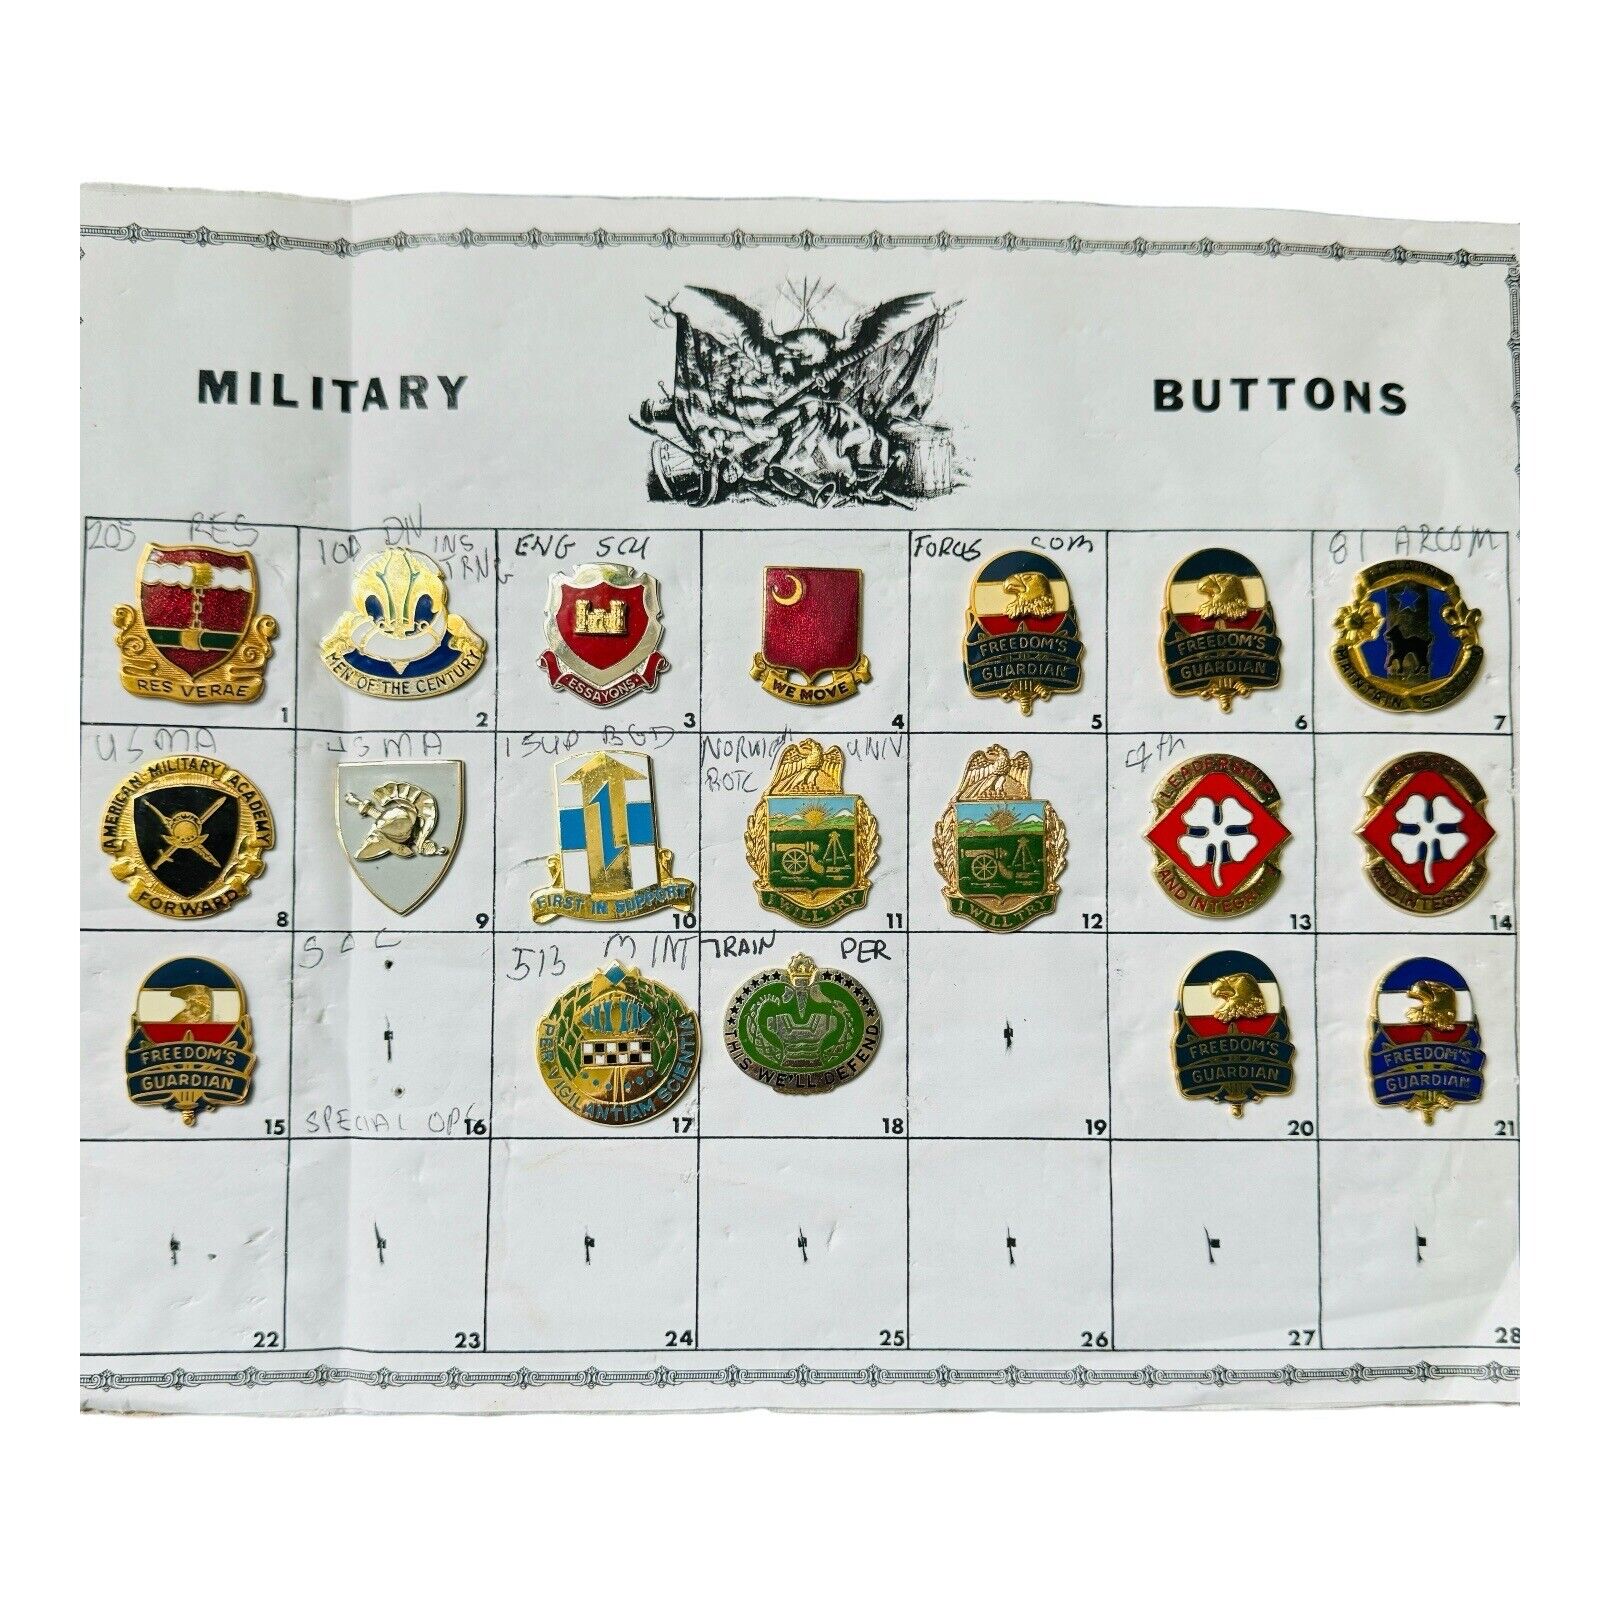 19 US Military Insignia Crest Pins Badges DUI, Buttons